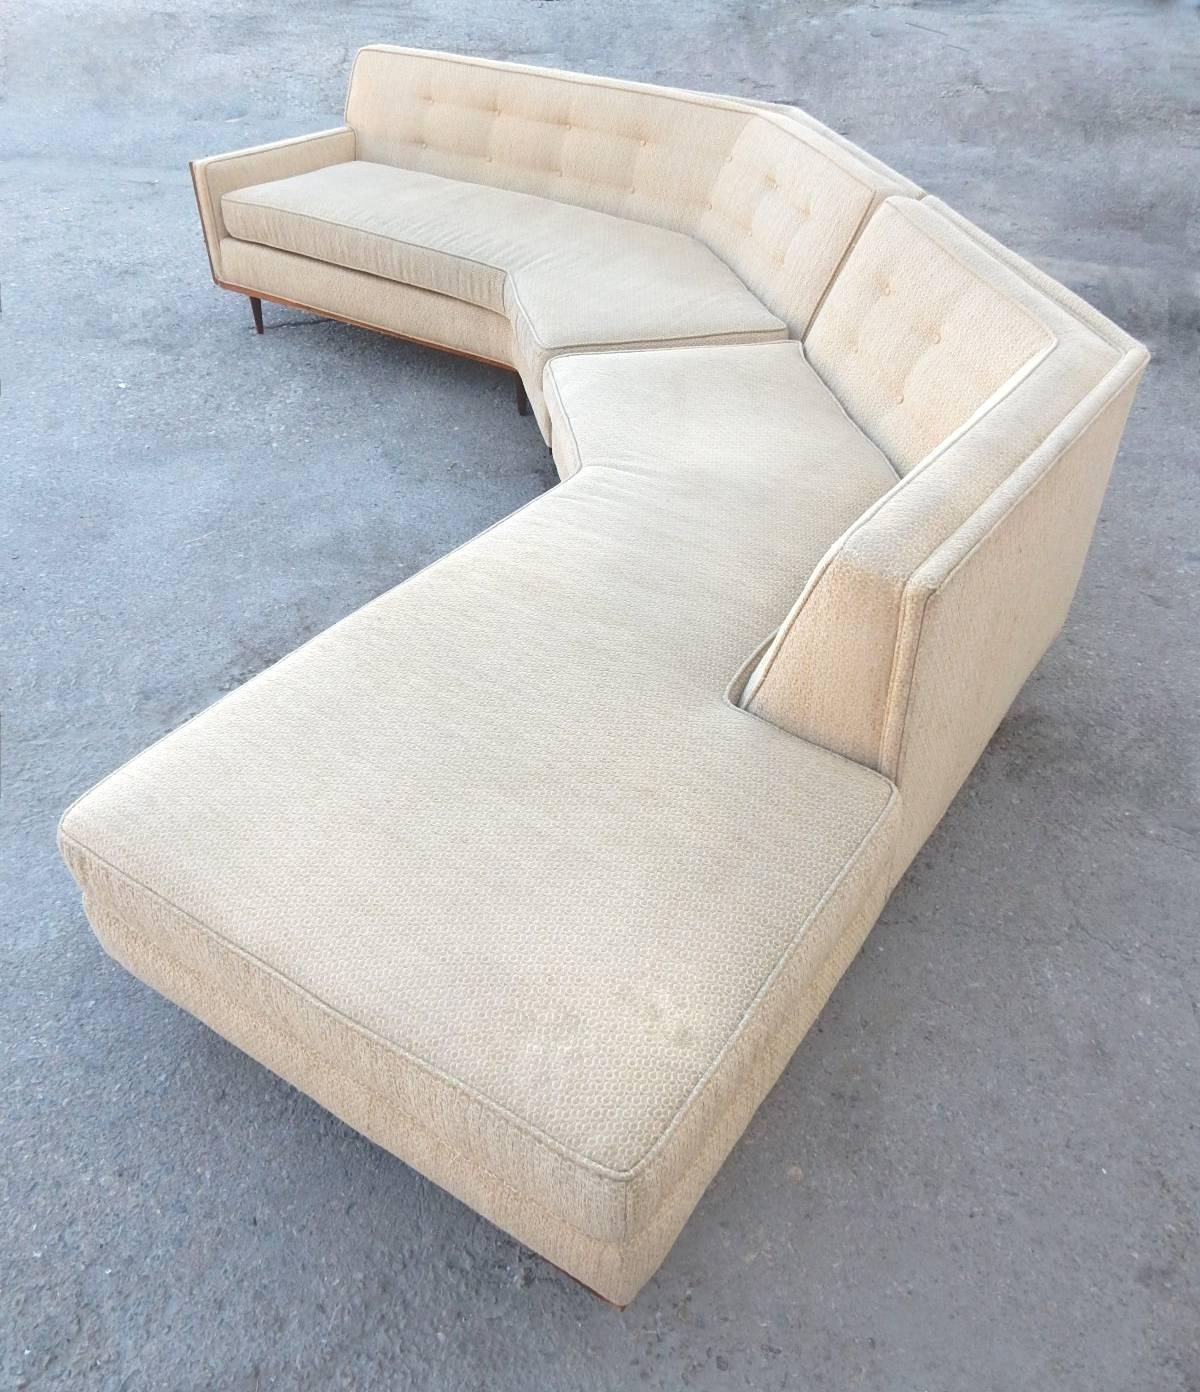 Tasty 12 foot long sectional sofa, circa 1960. Cane end panel and surround seating opposite end. Wood trimmed lower edge with thin tapered legs. Tufted back in a tan colored upholstery.
No manufacturer tag. Very in the style of Harvey Probber